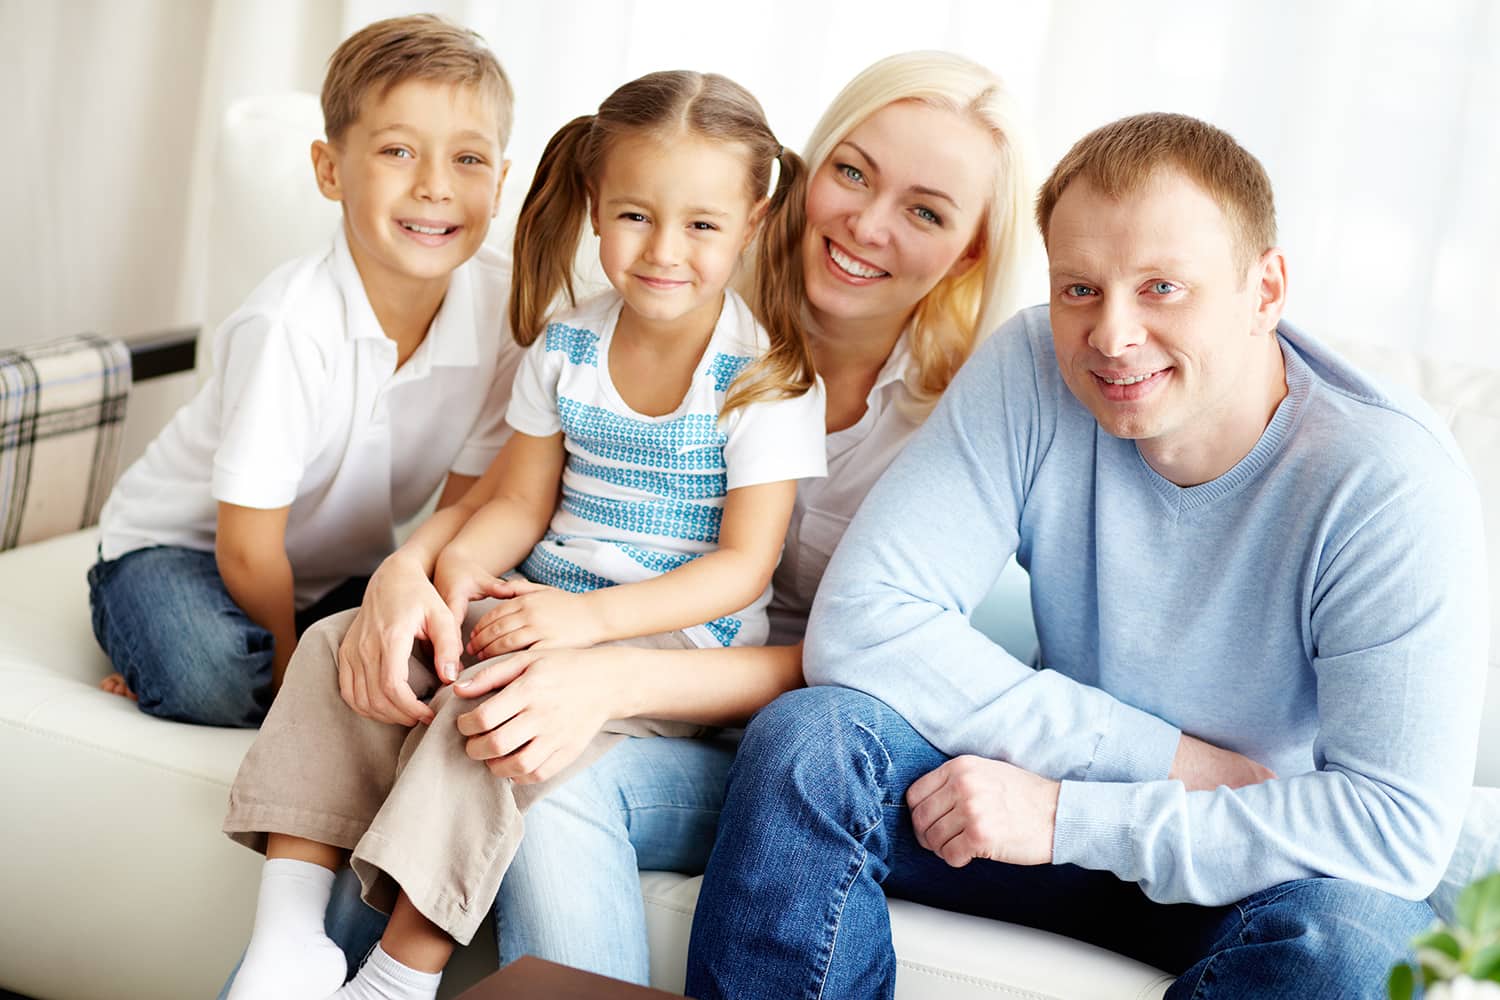 Happy Family with a great dentist. Couple with a boy and girl